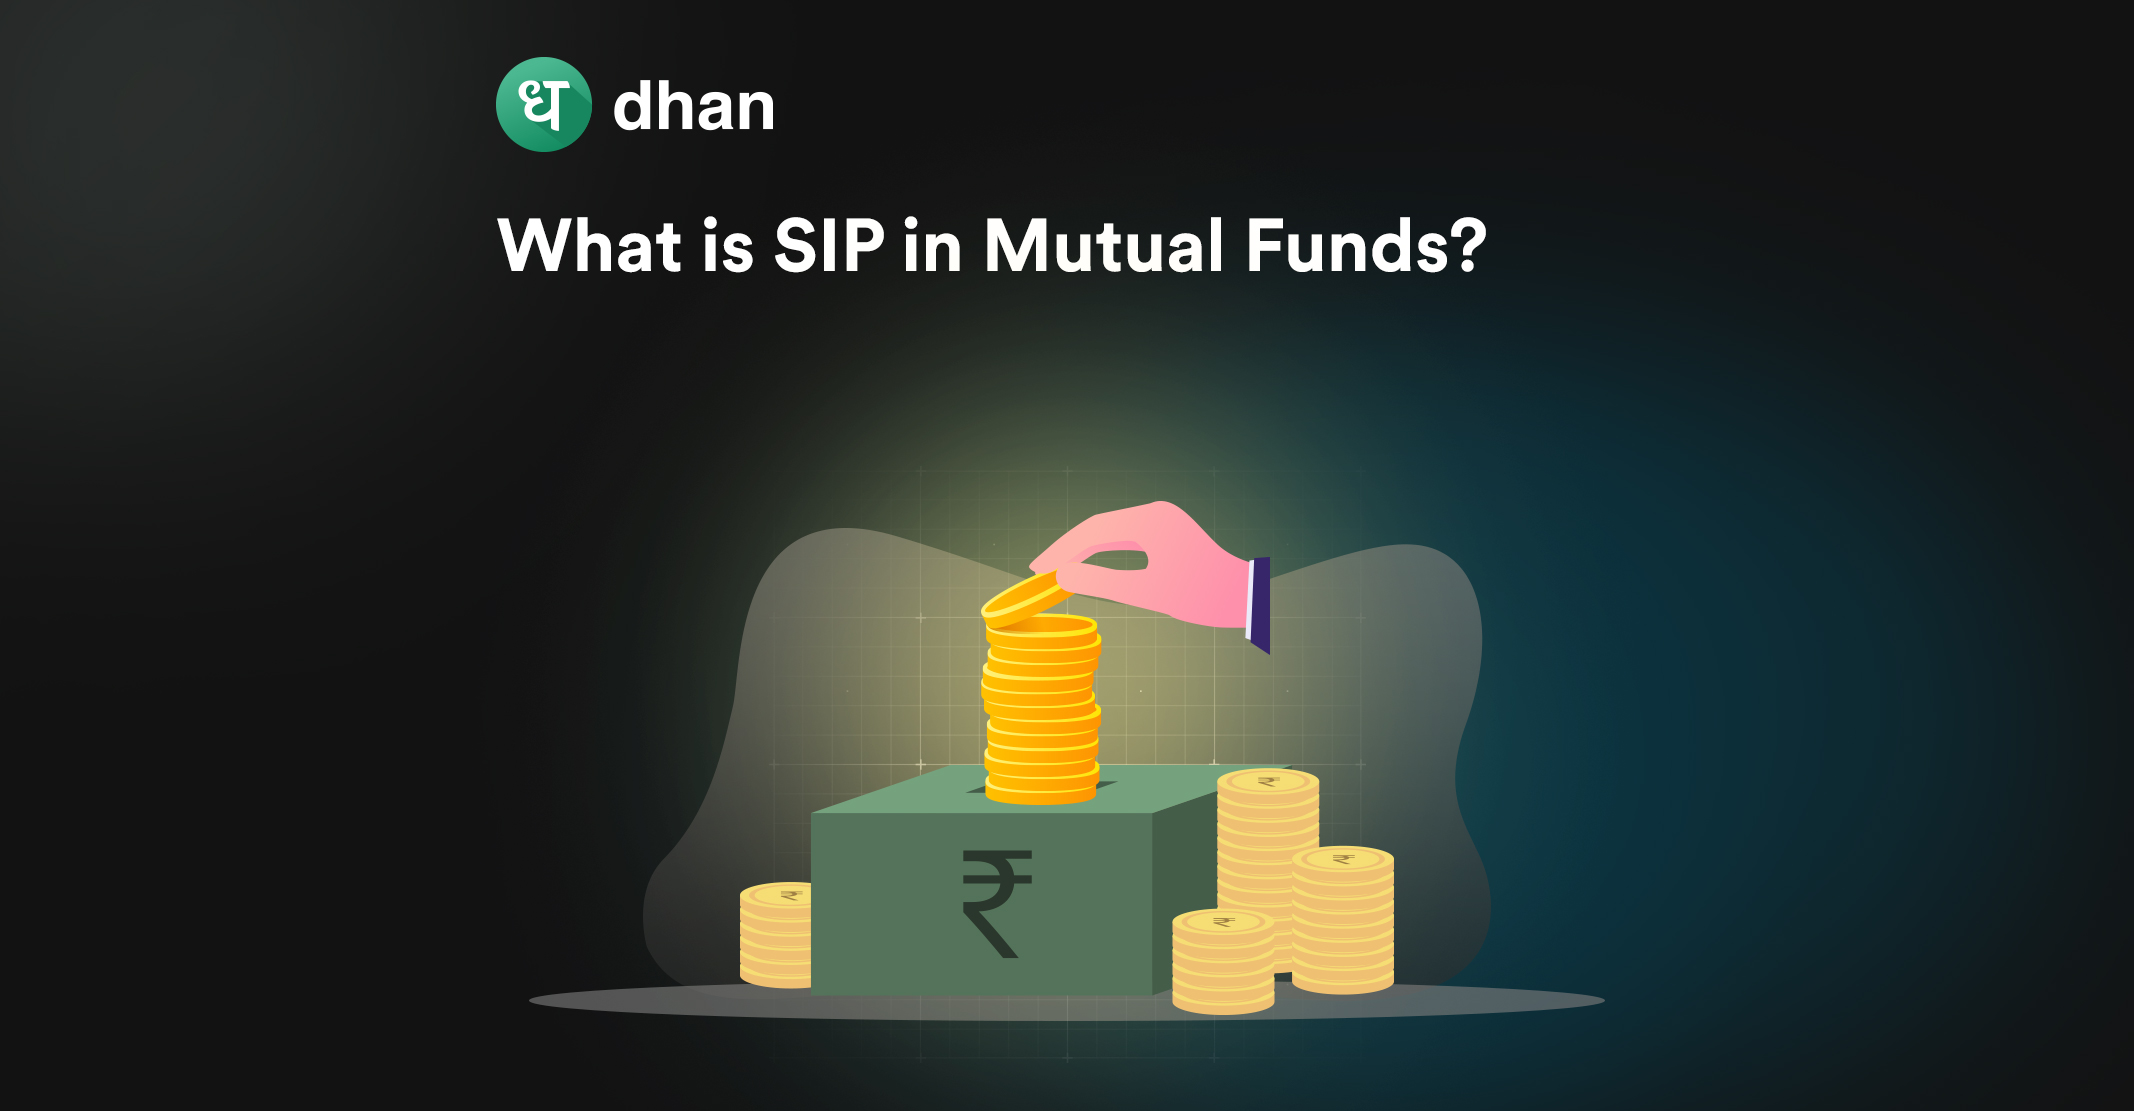 What is SIP in Mutual Funds